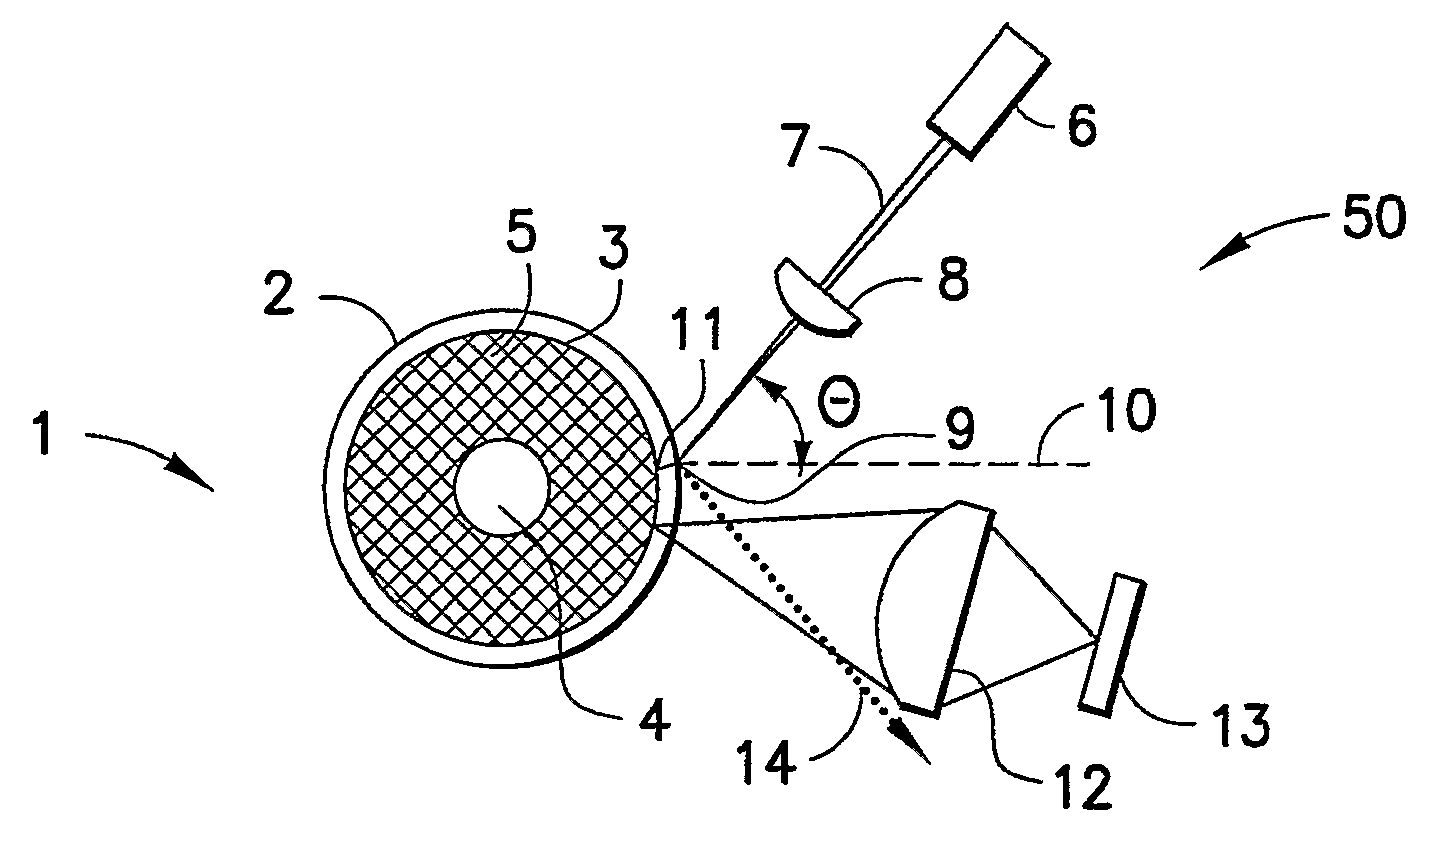 Apparatus for performing optical measurements on blood culture bottles